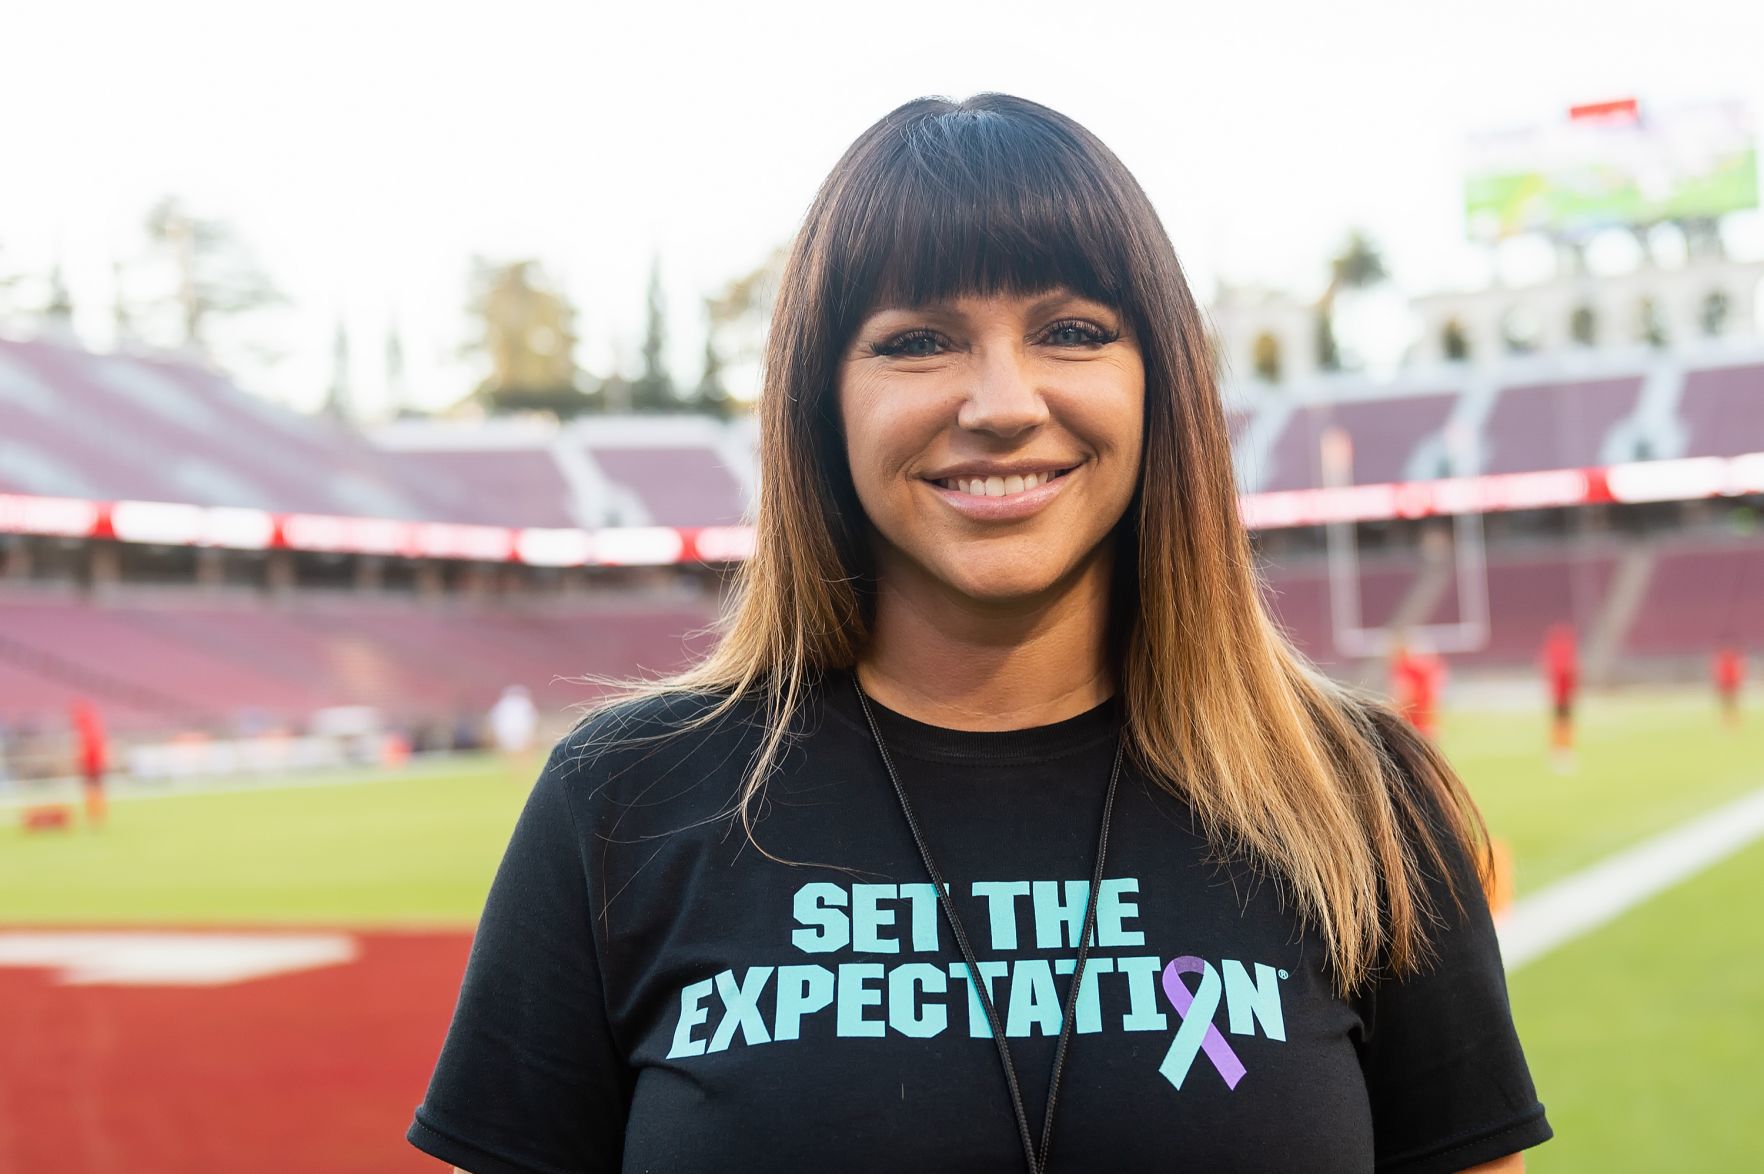 Sexual assault survivor Brenda Tracy works to effect change one school, one team at a time